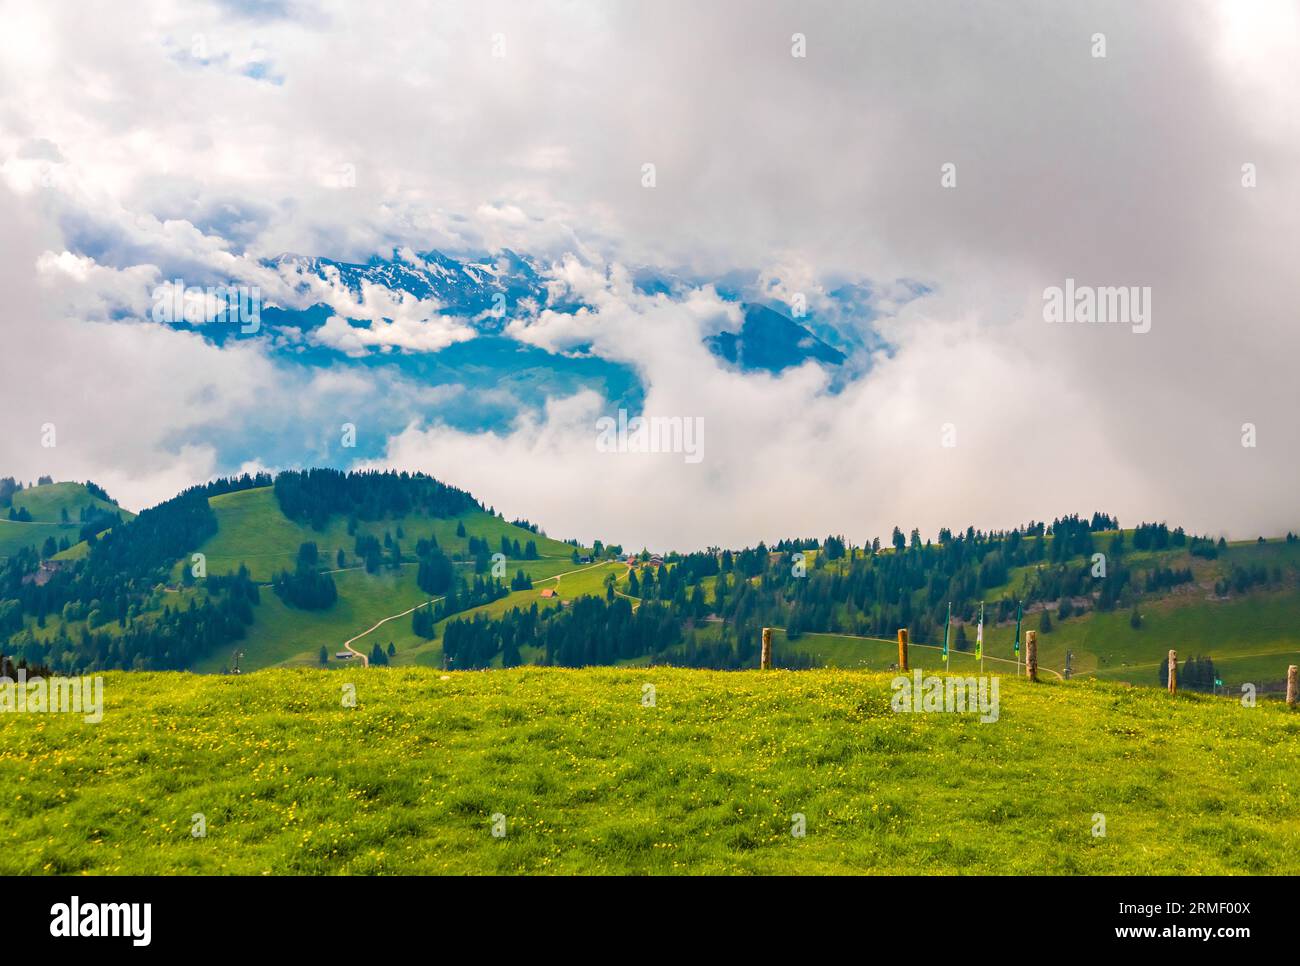 Lovely landscape view of the Rigi Kulm's surrounding with the alps in the background. Geologically, the Rigi is not part of the Alps, but instead... Stock Photo